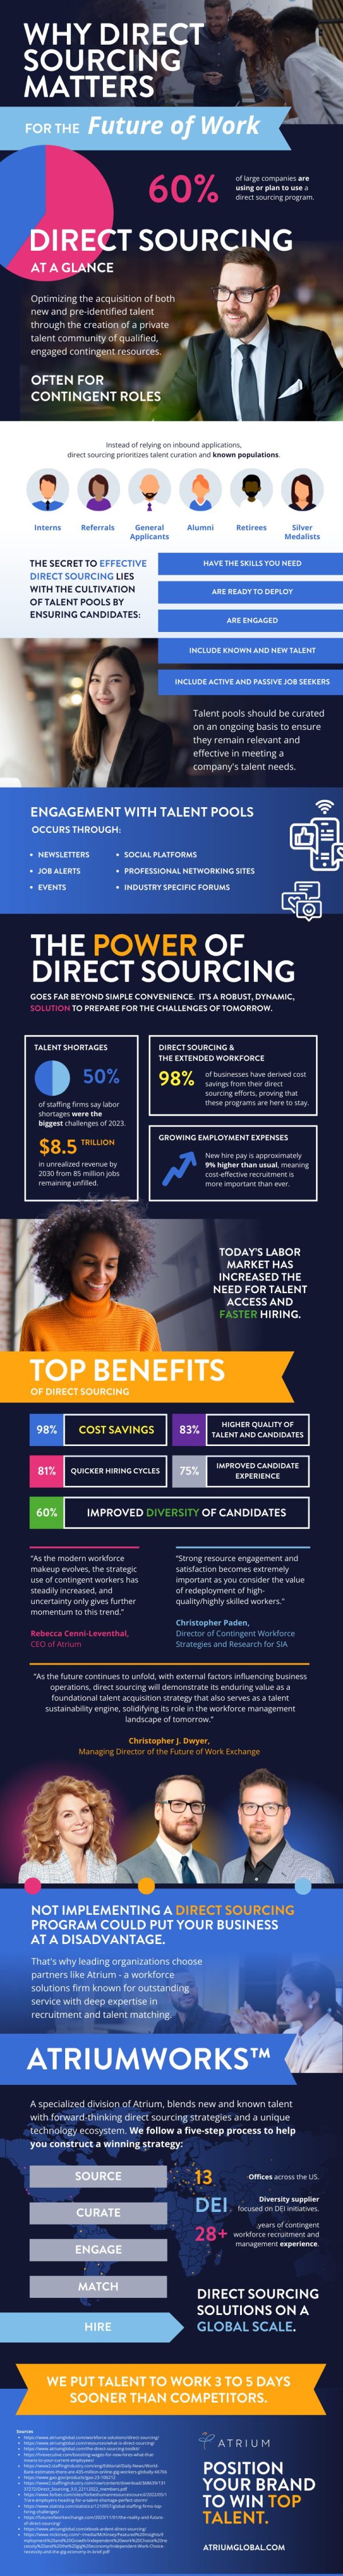 Infographic on benefits of direct sourcing for talent acquisition.